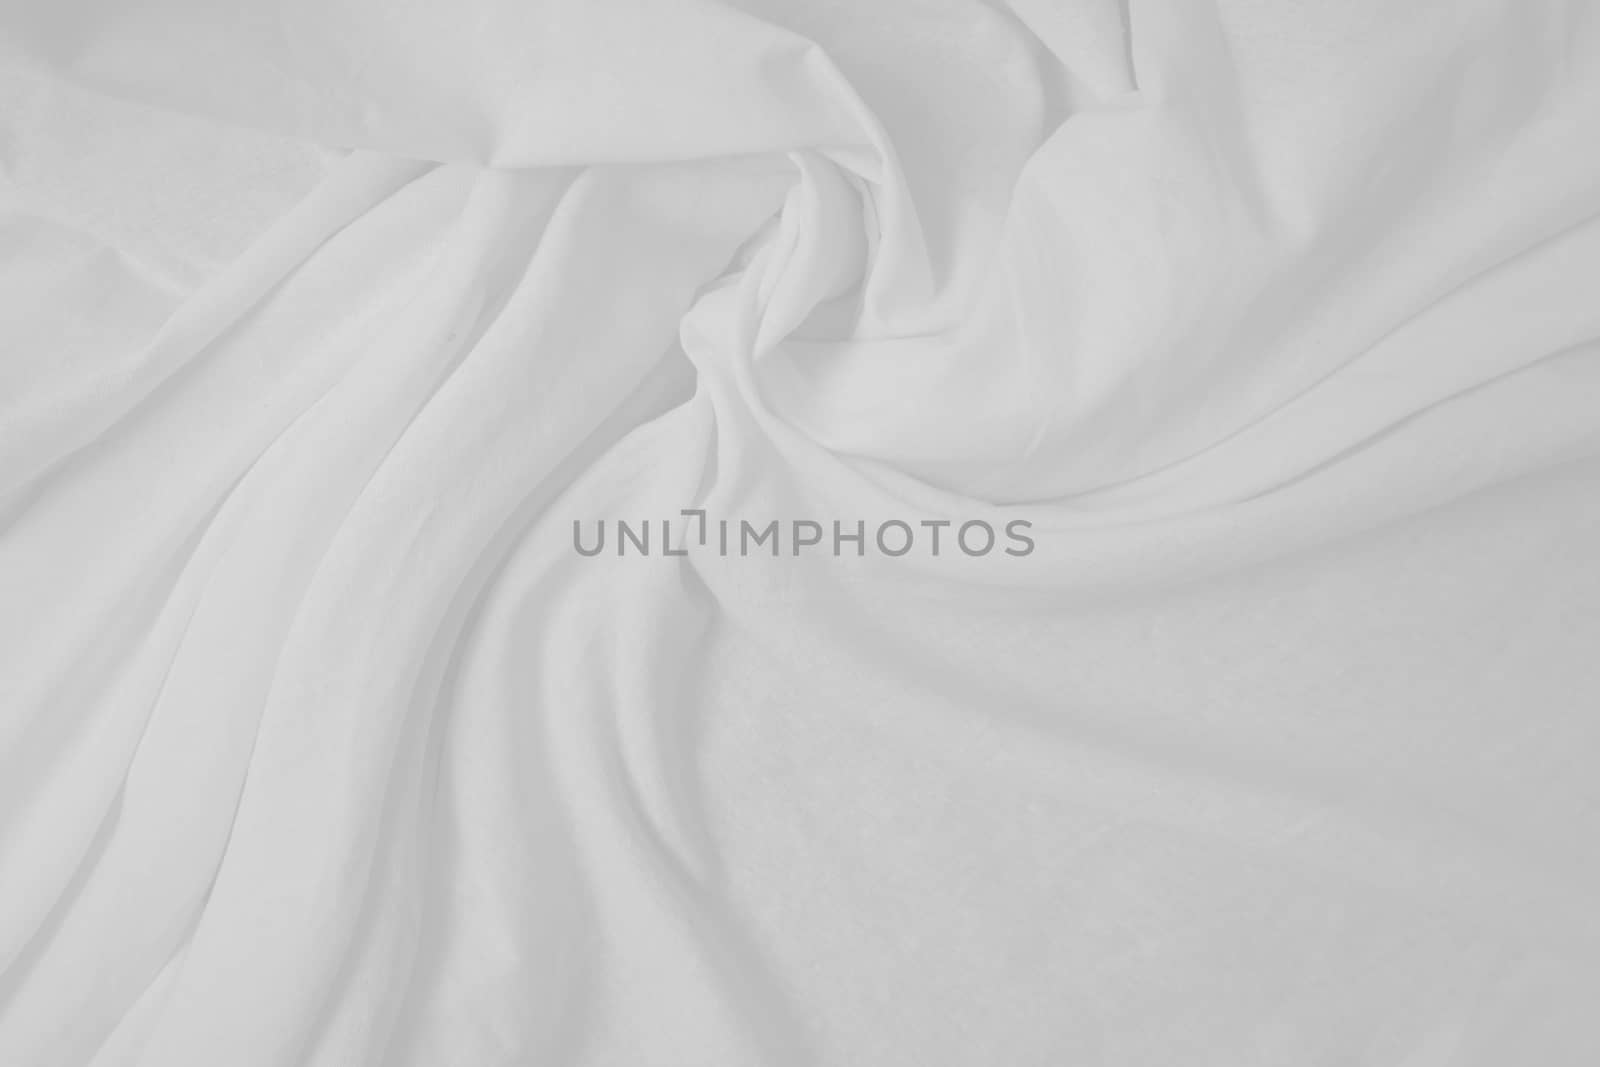 Rippled white cotton fabric texture background by Urvashi-A